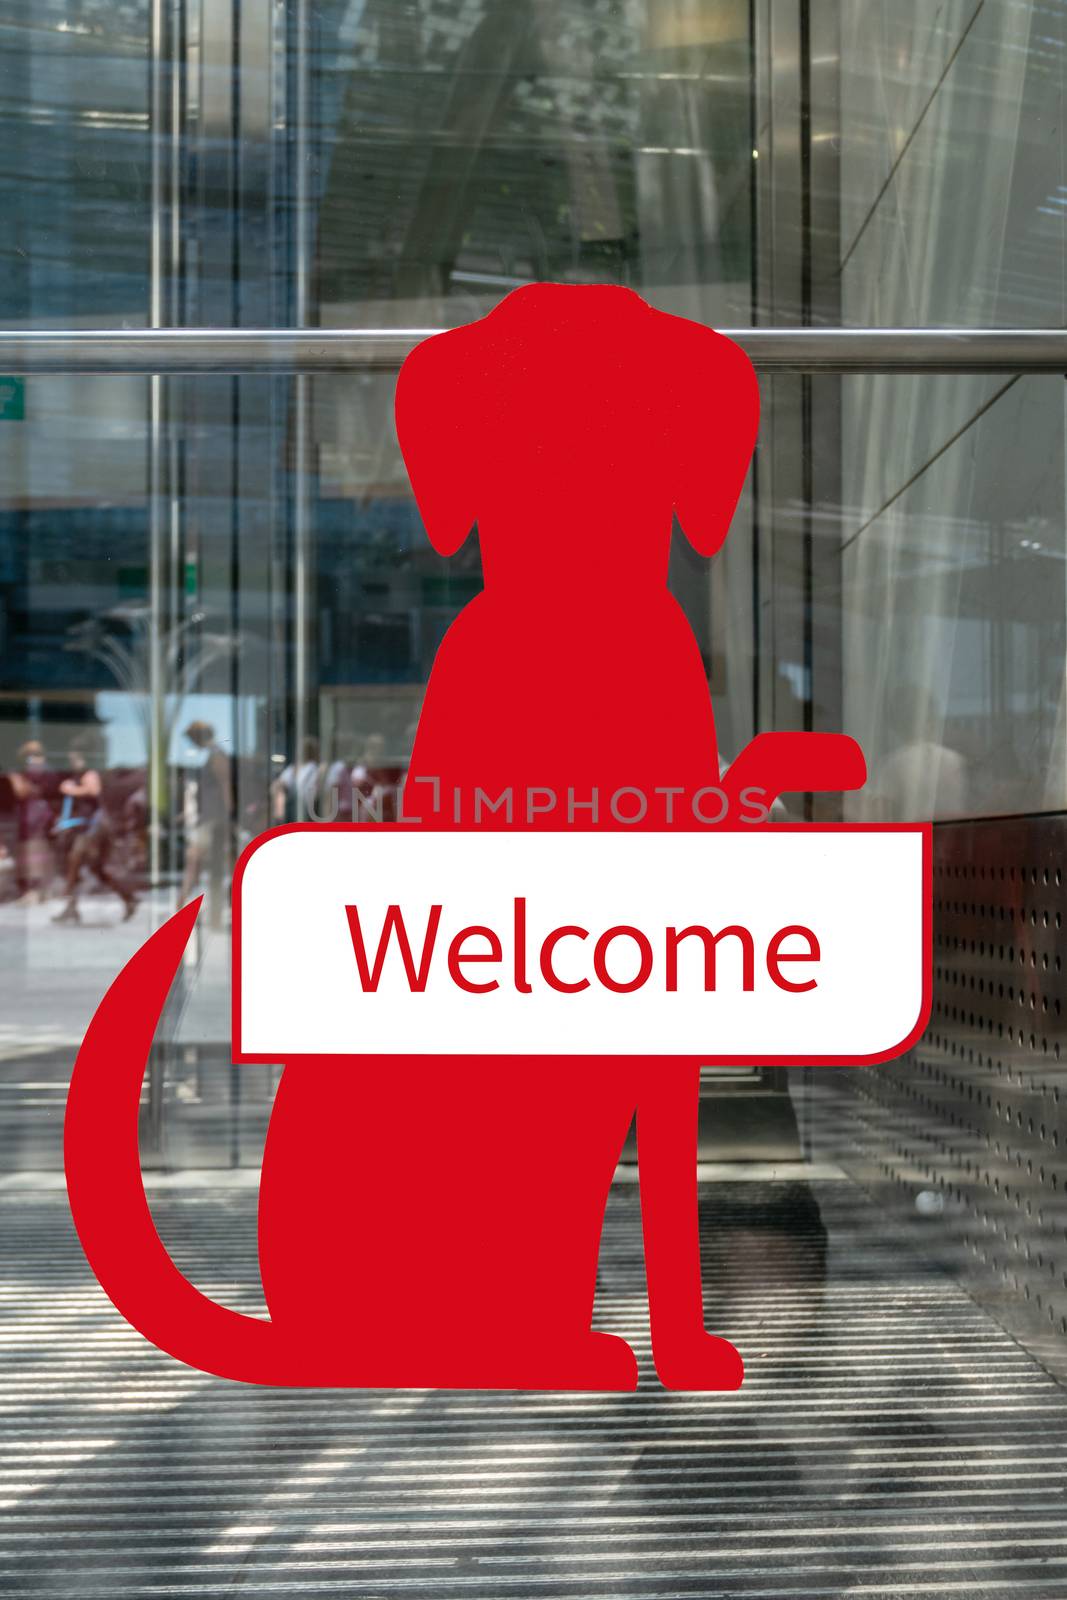 Dogs Welcome sign outside shop. Dog-friendly sign. Welcome sign for pets. Allowing pet into facilities. Dogs friendly place, dogs special area, pets welcome here concept.